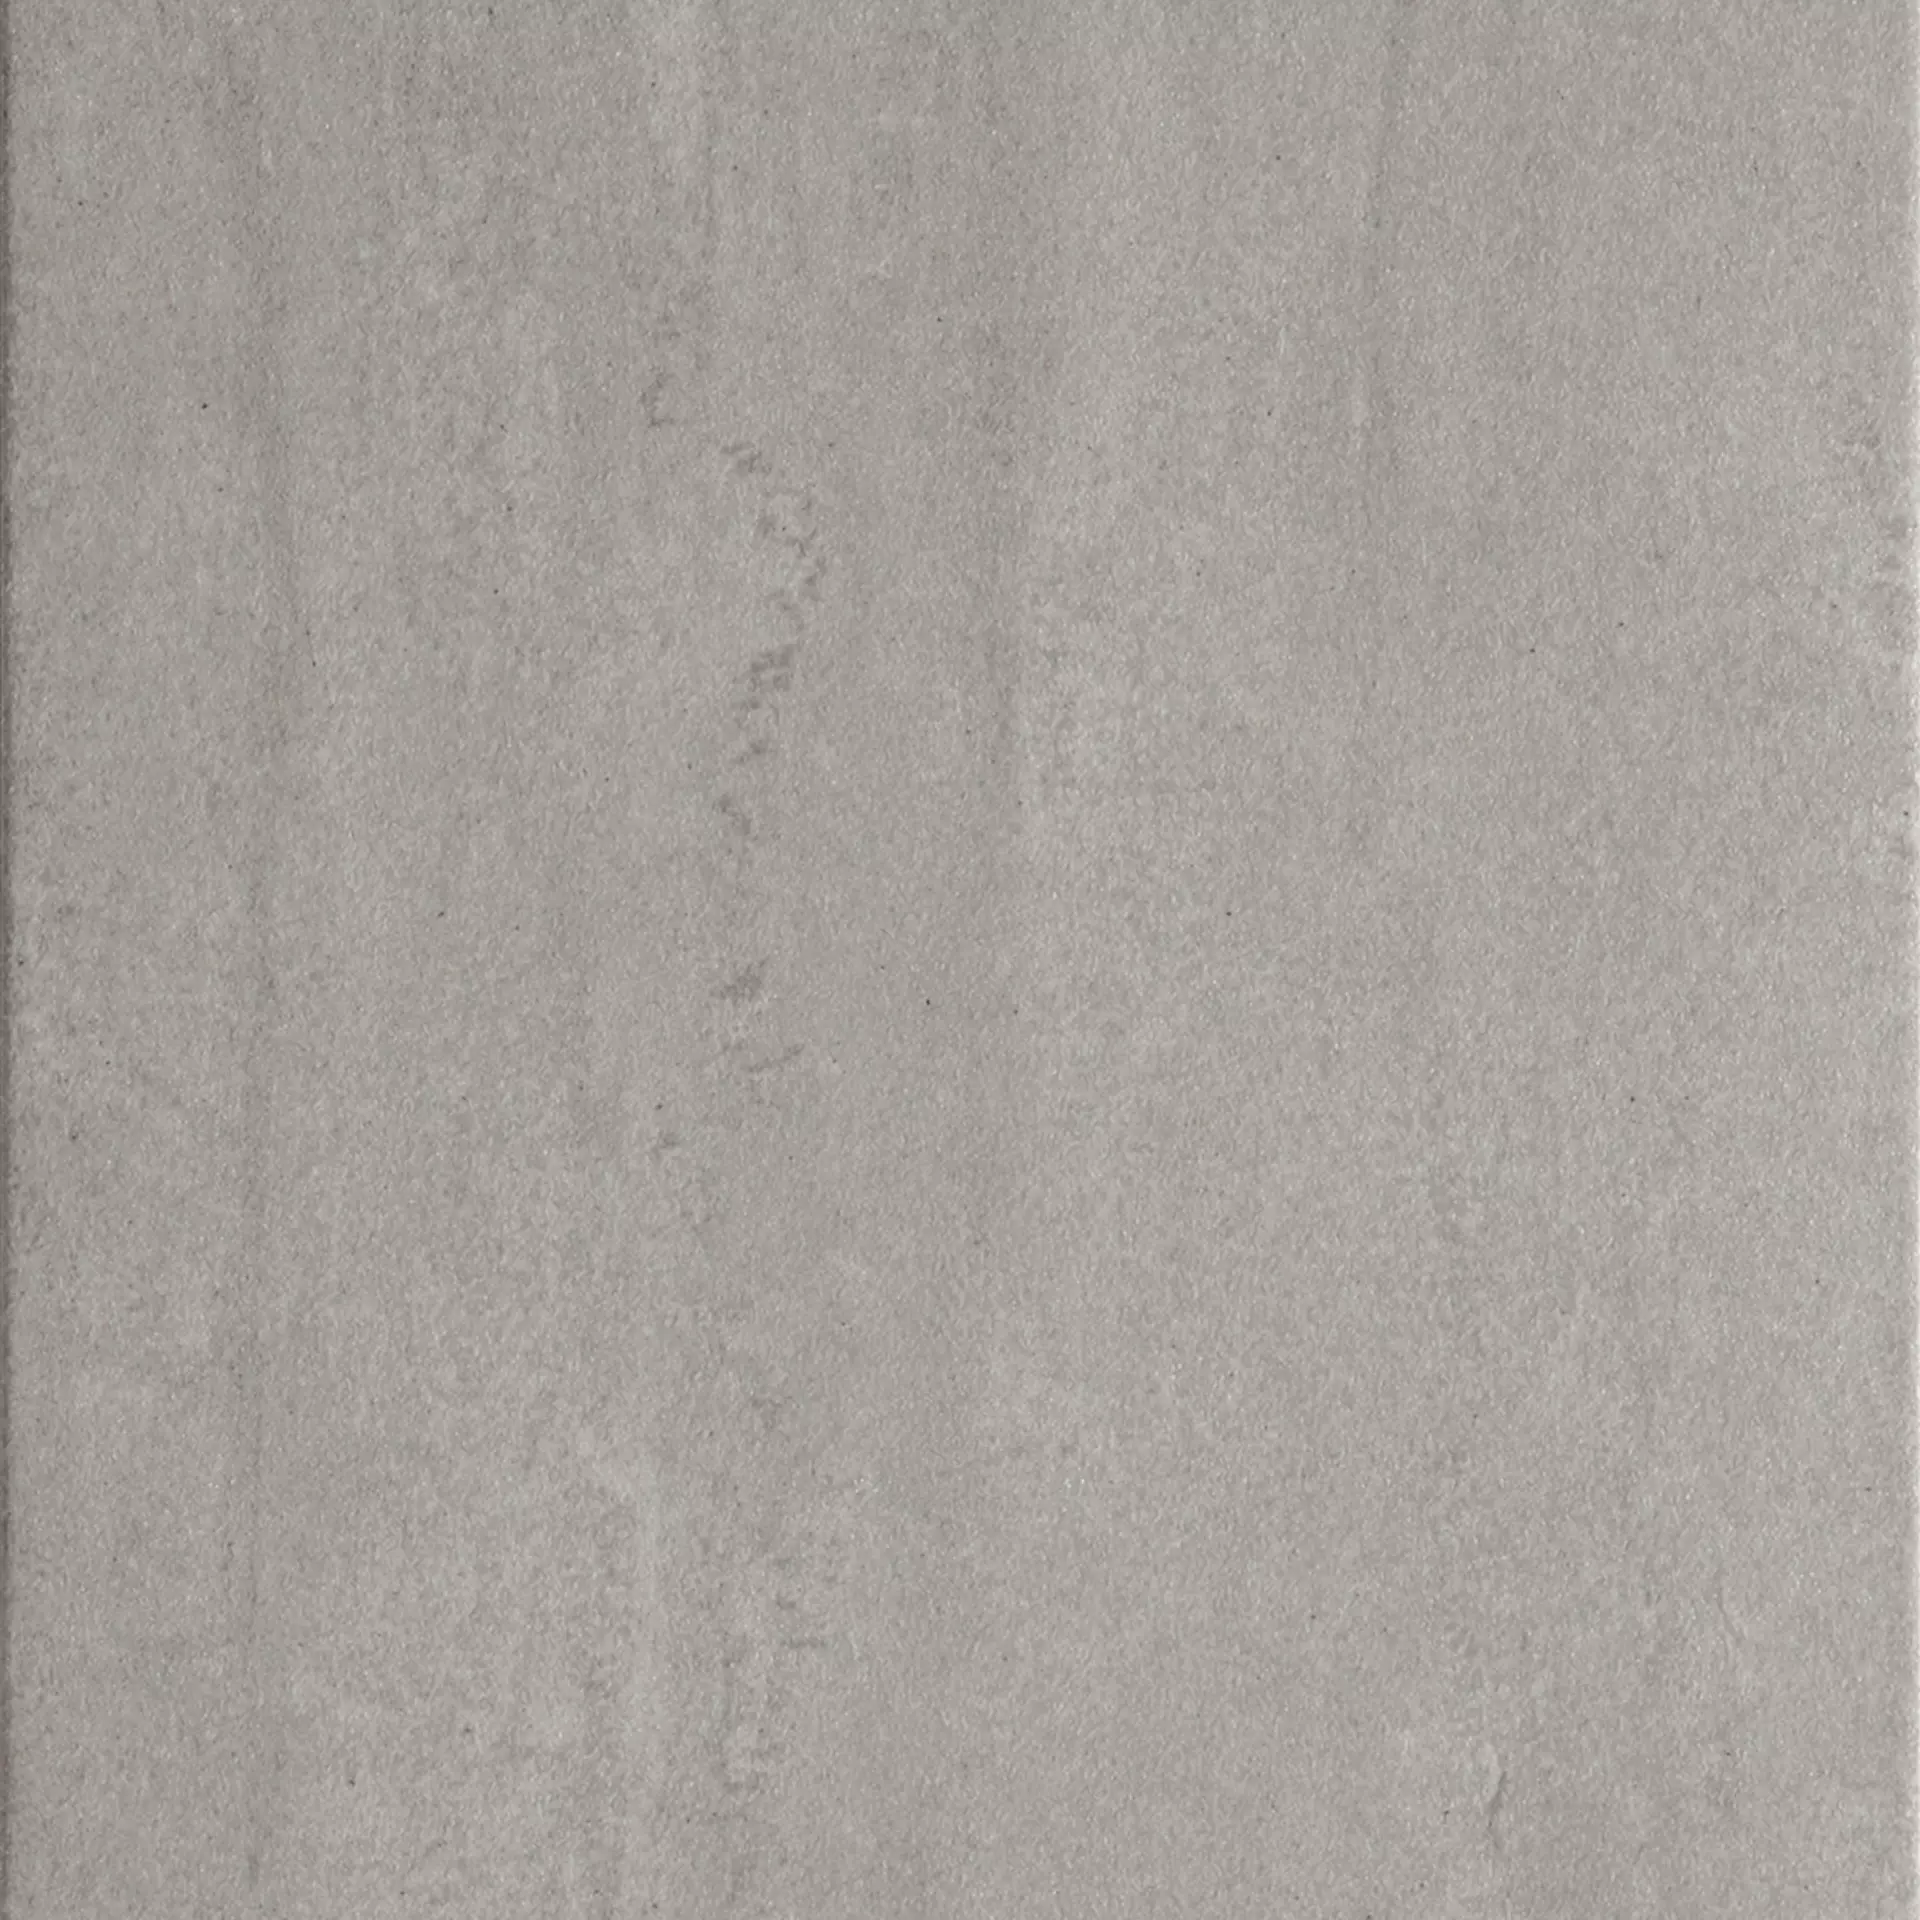 Rondine Contract Silver Naturale J84030 60,5x60,5cm 9,5mm